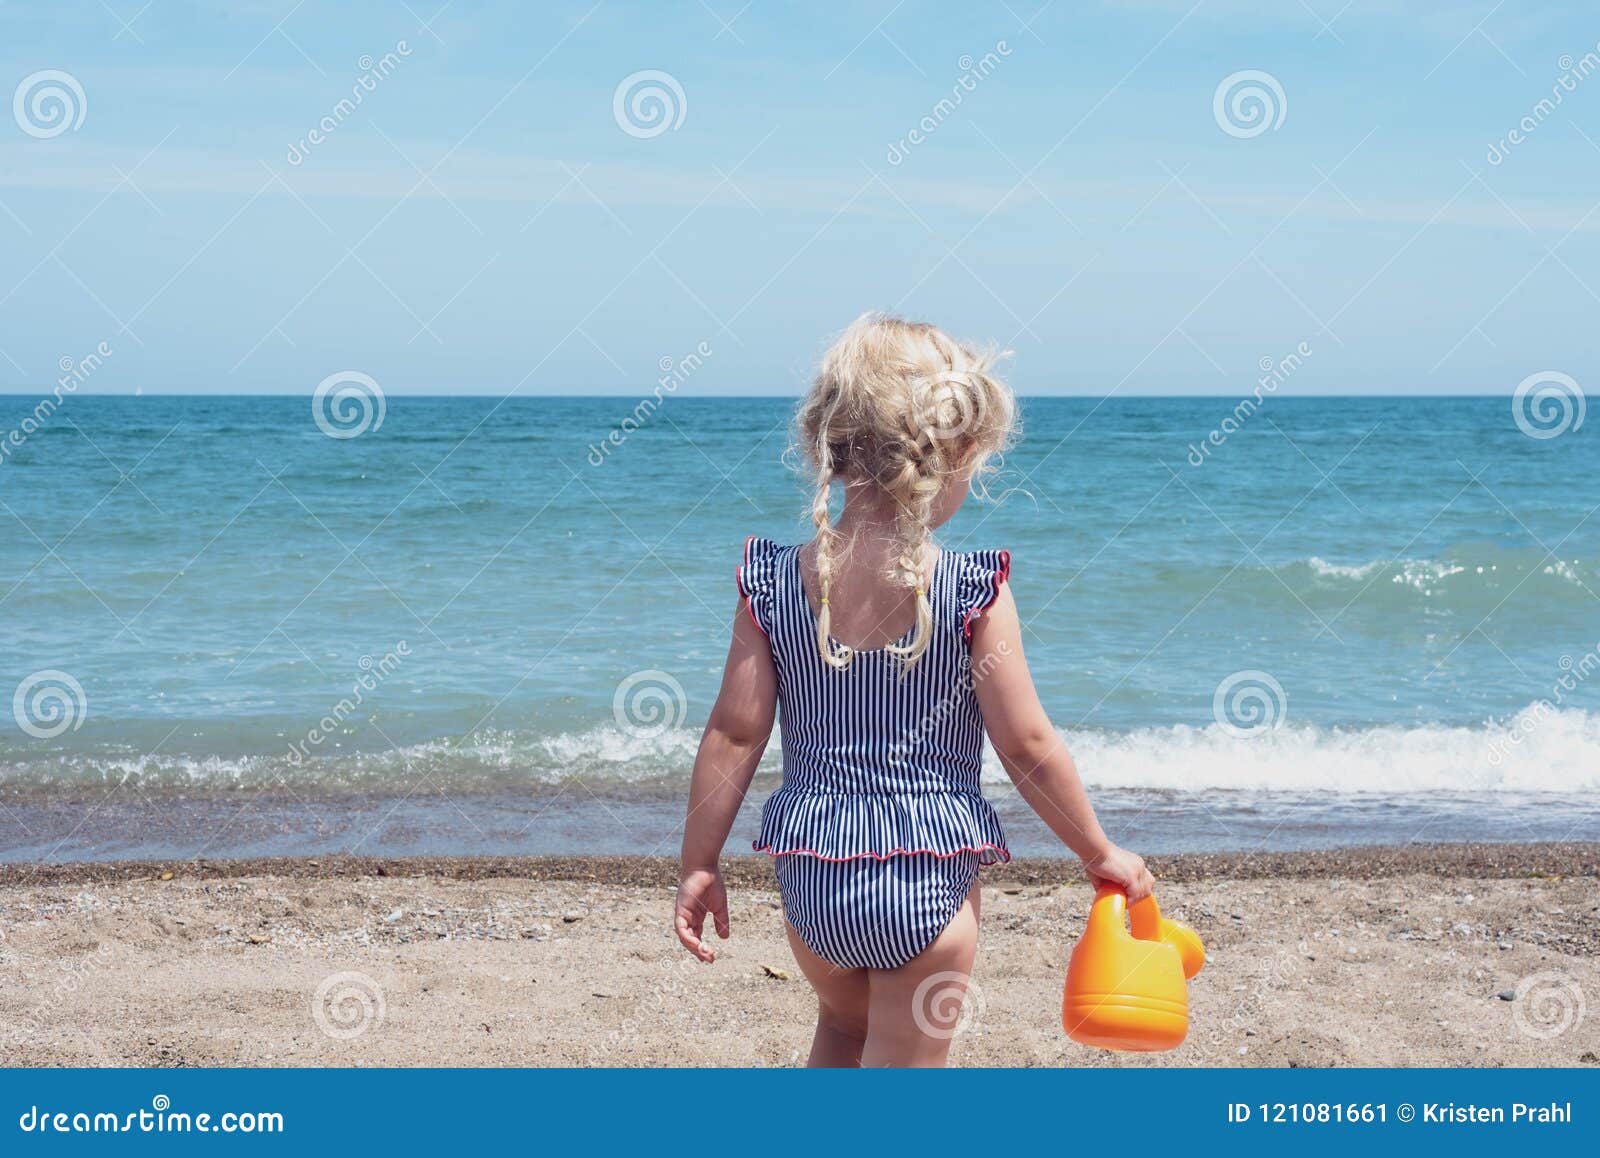 backview of little girl playing at the beach